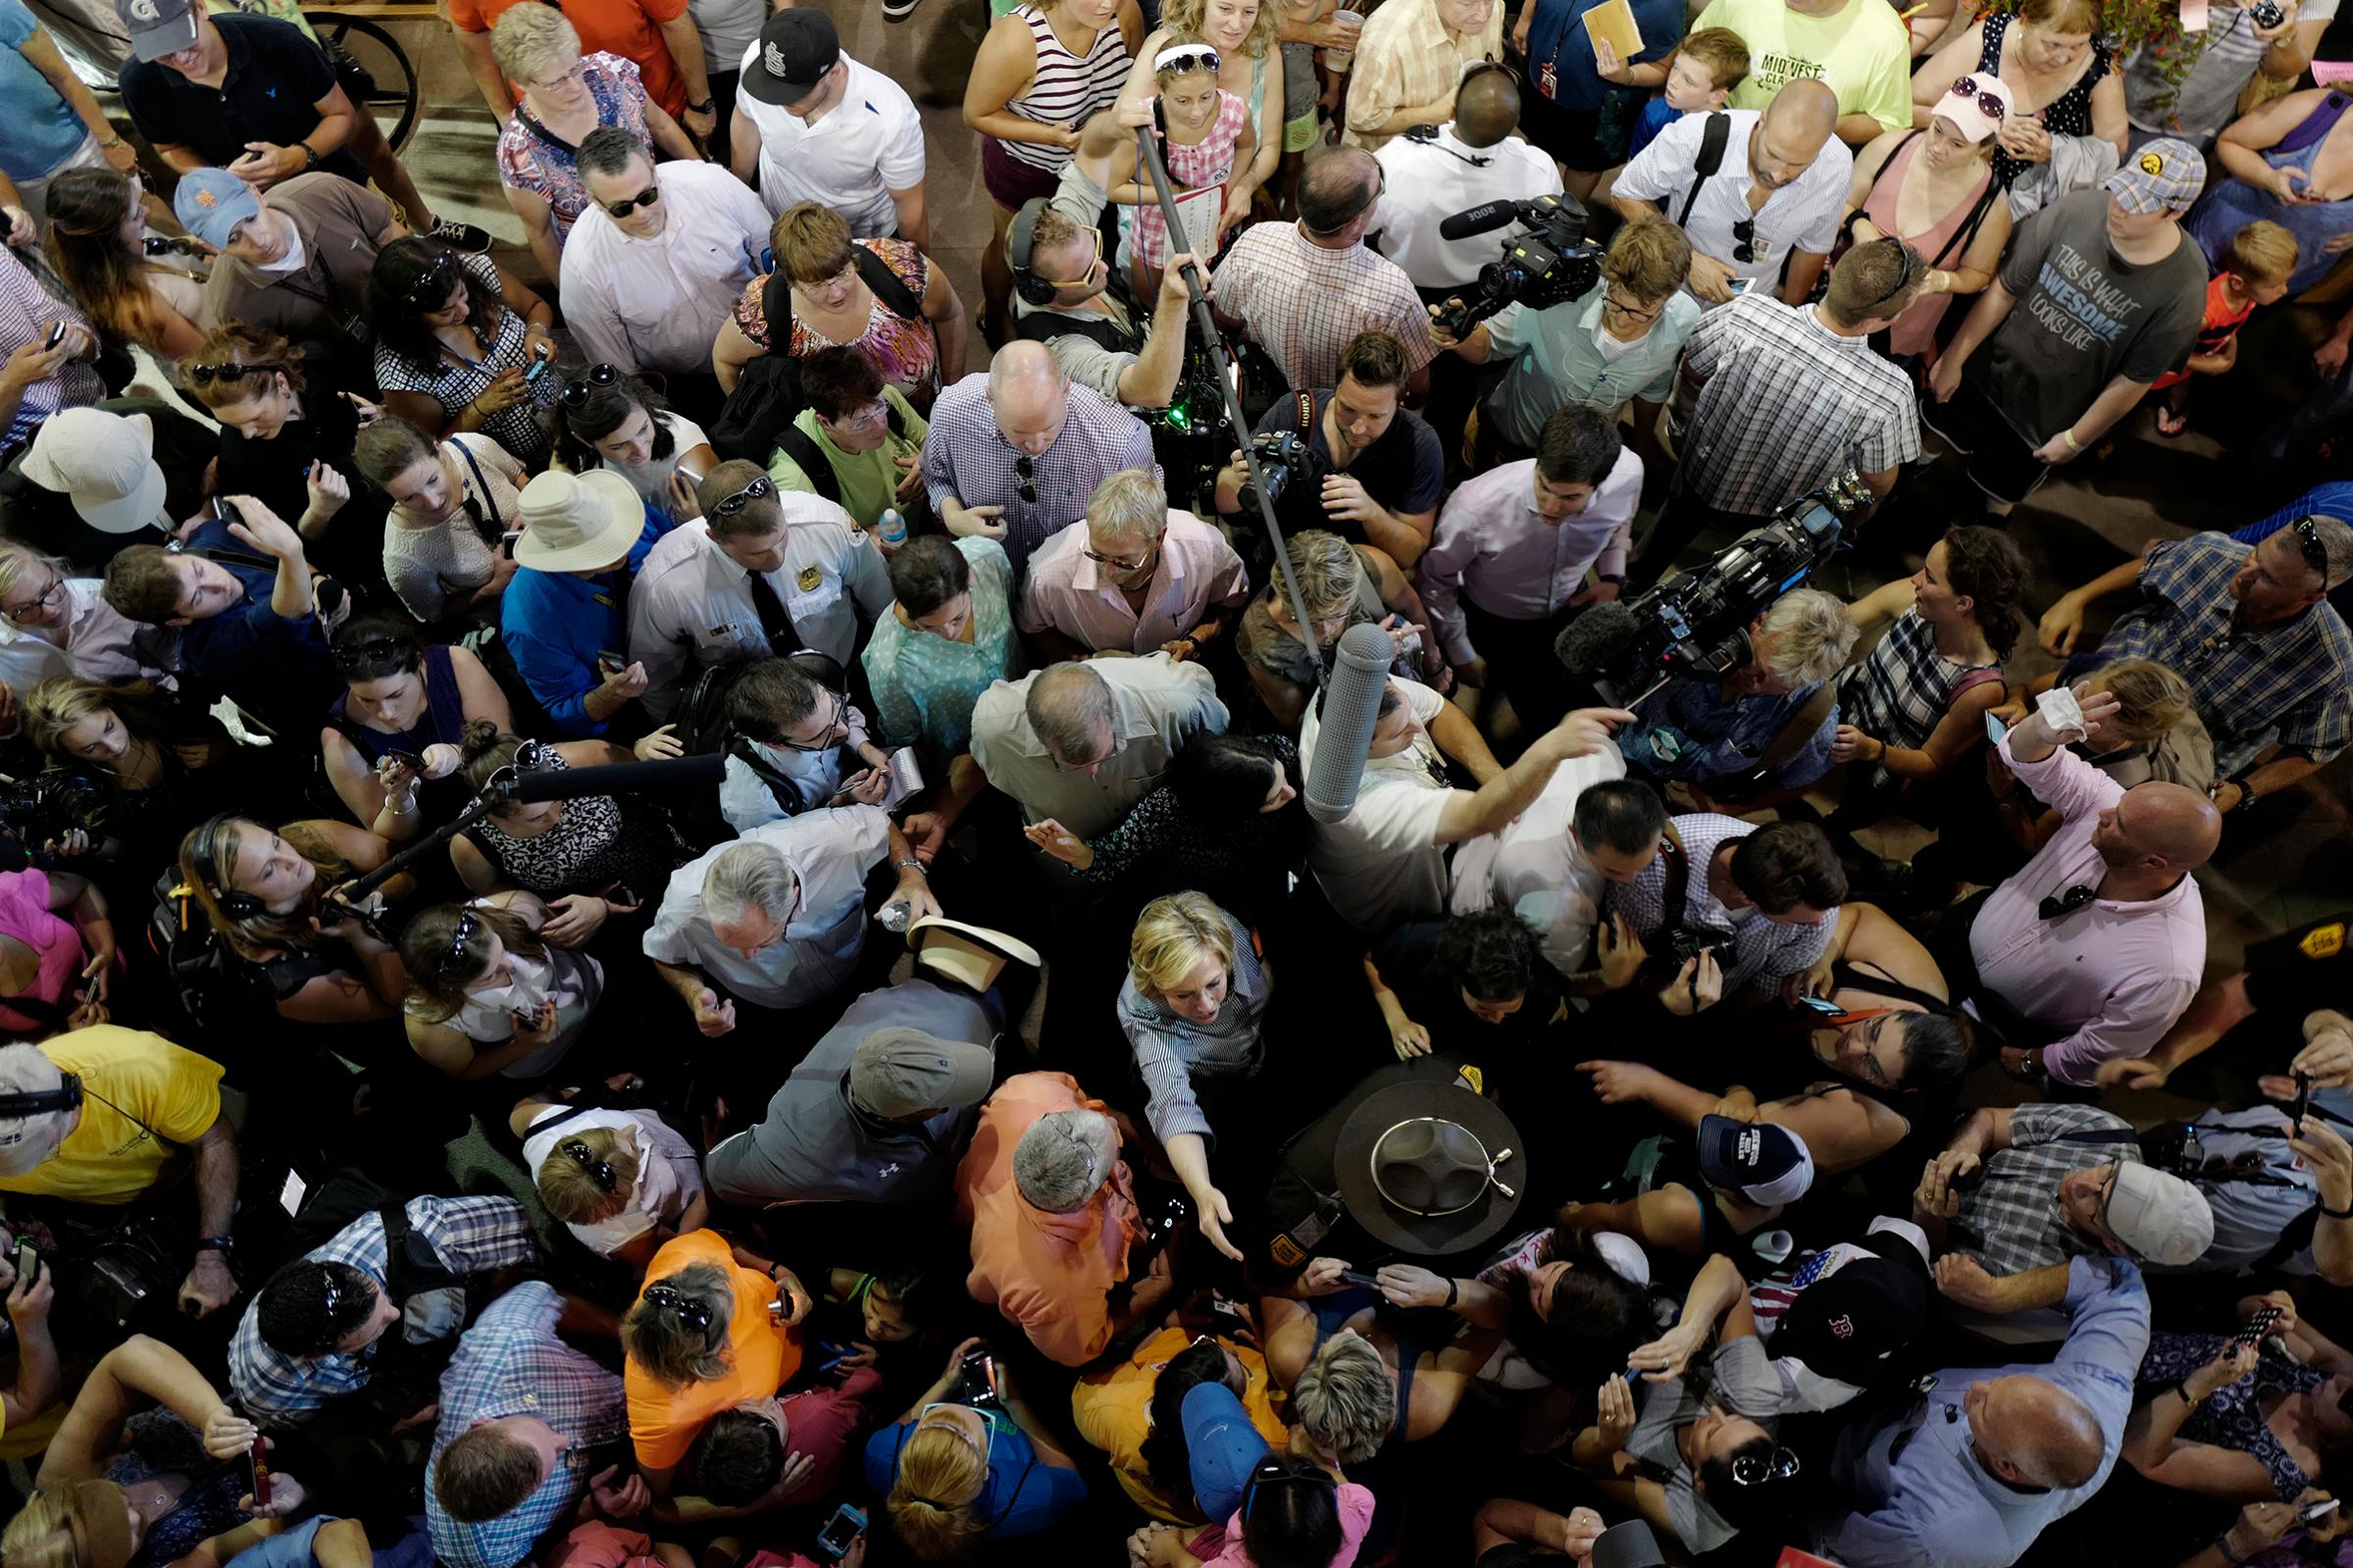 Hillary Clinton is a face in the crowd as she tours the Agriculture Building at the Iowa State Fair in Des Moines, Iowa, on Aug. 15, 2015.